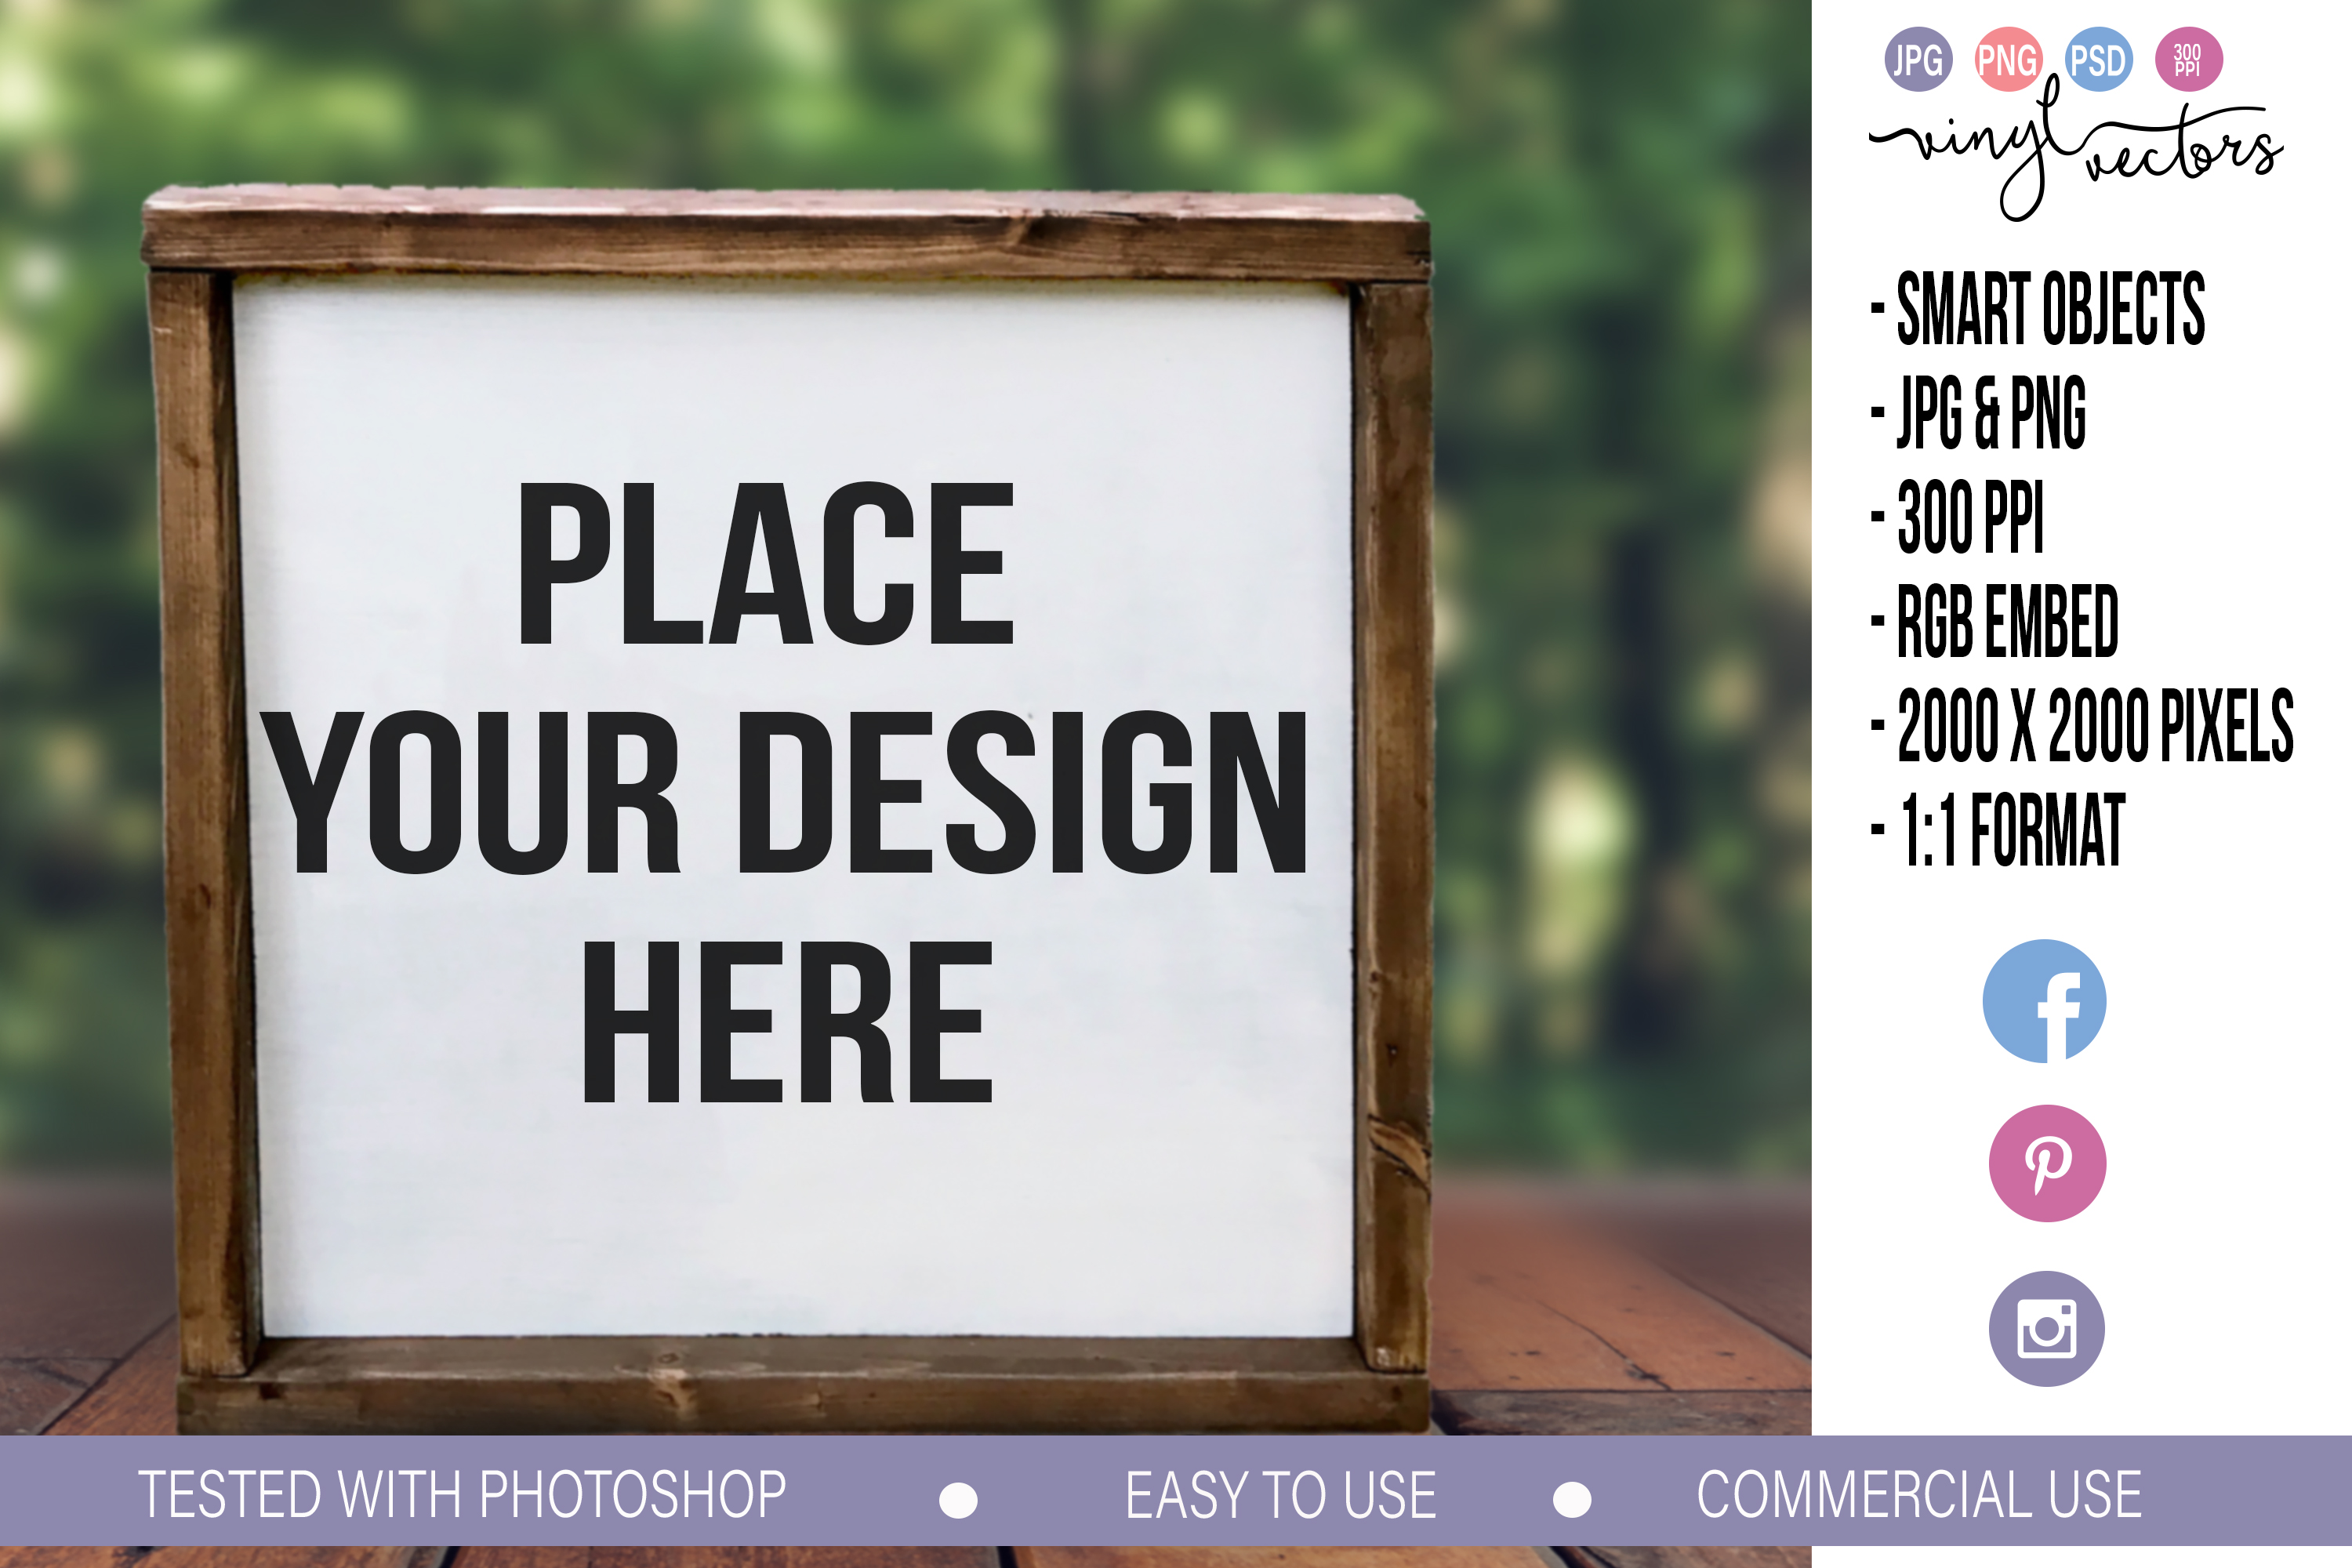 Download Farmhouse Style Wood Sign Mockup Rectangle Frame PSD JPG PNG